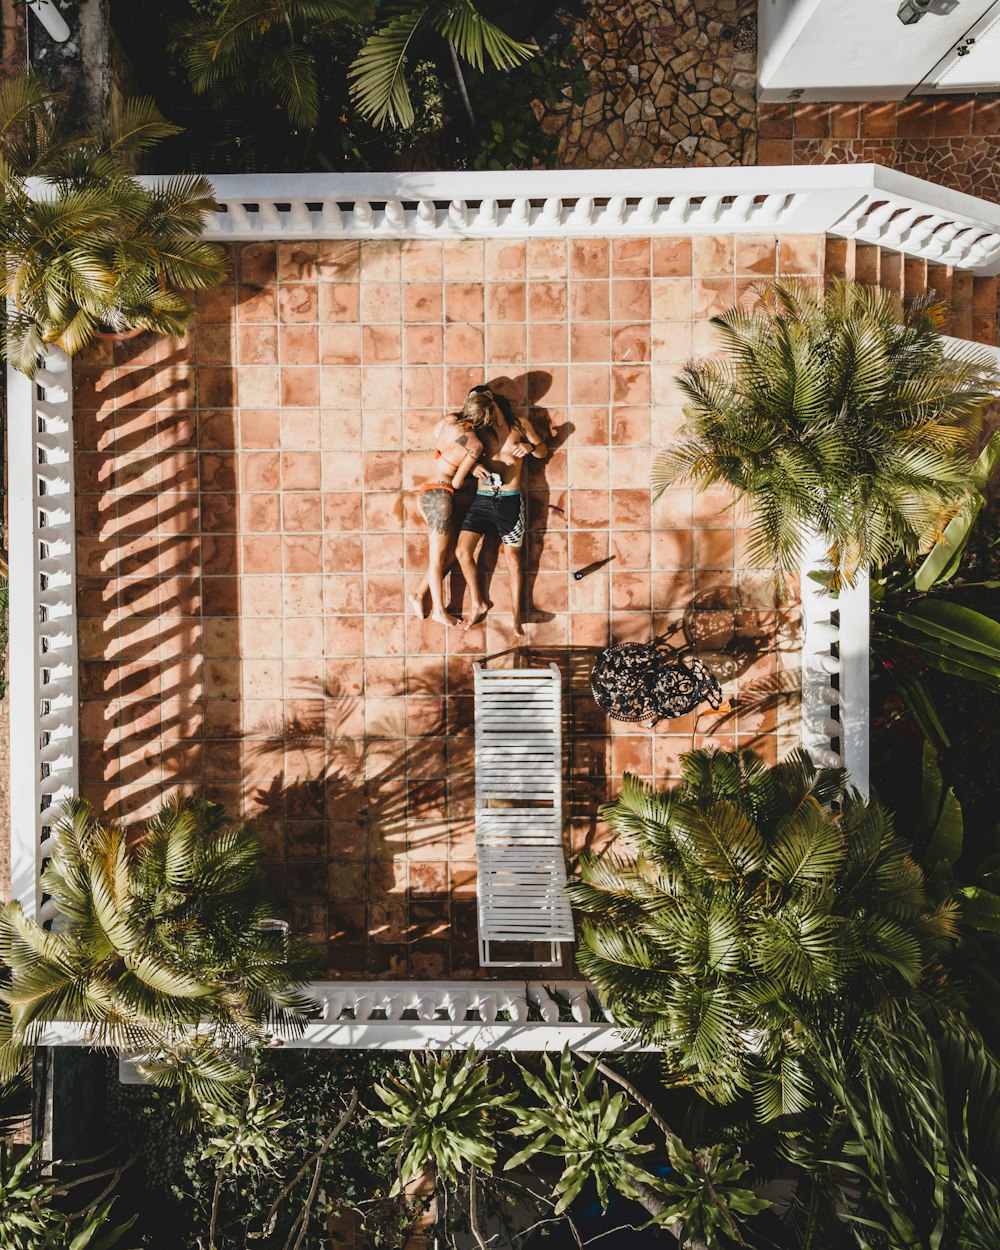 a woman in a bathing suit standing on a tiled wall